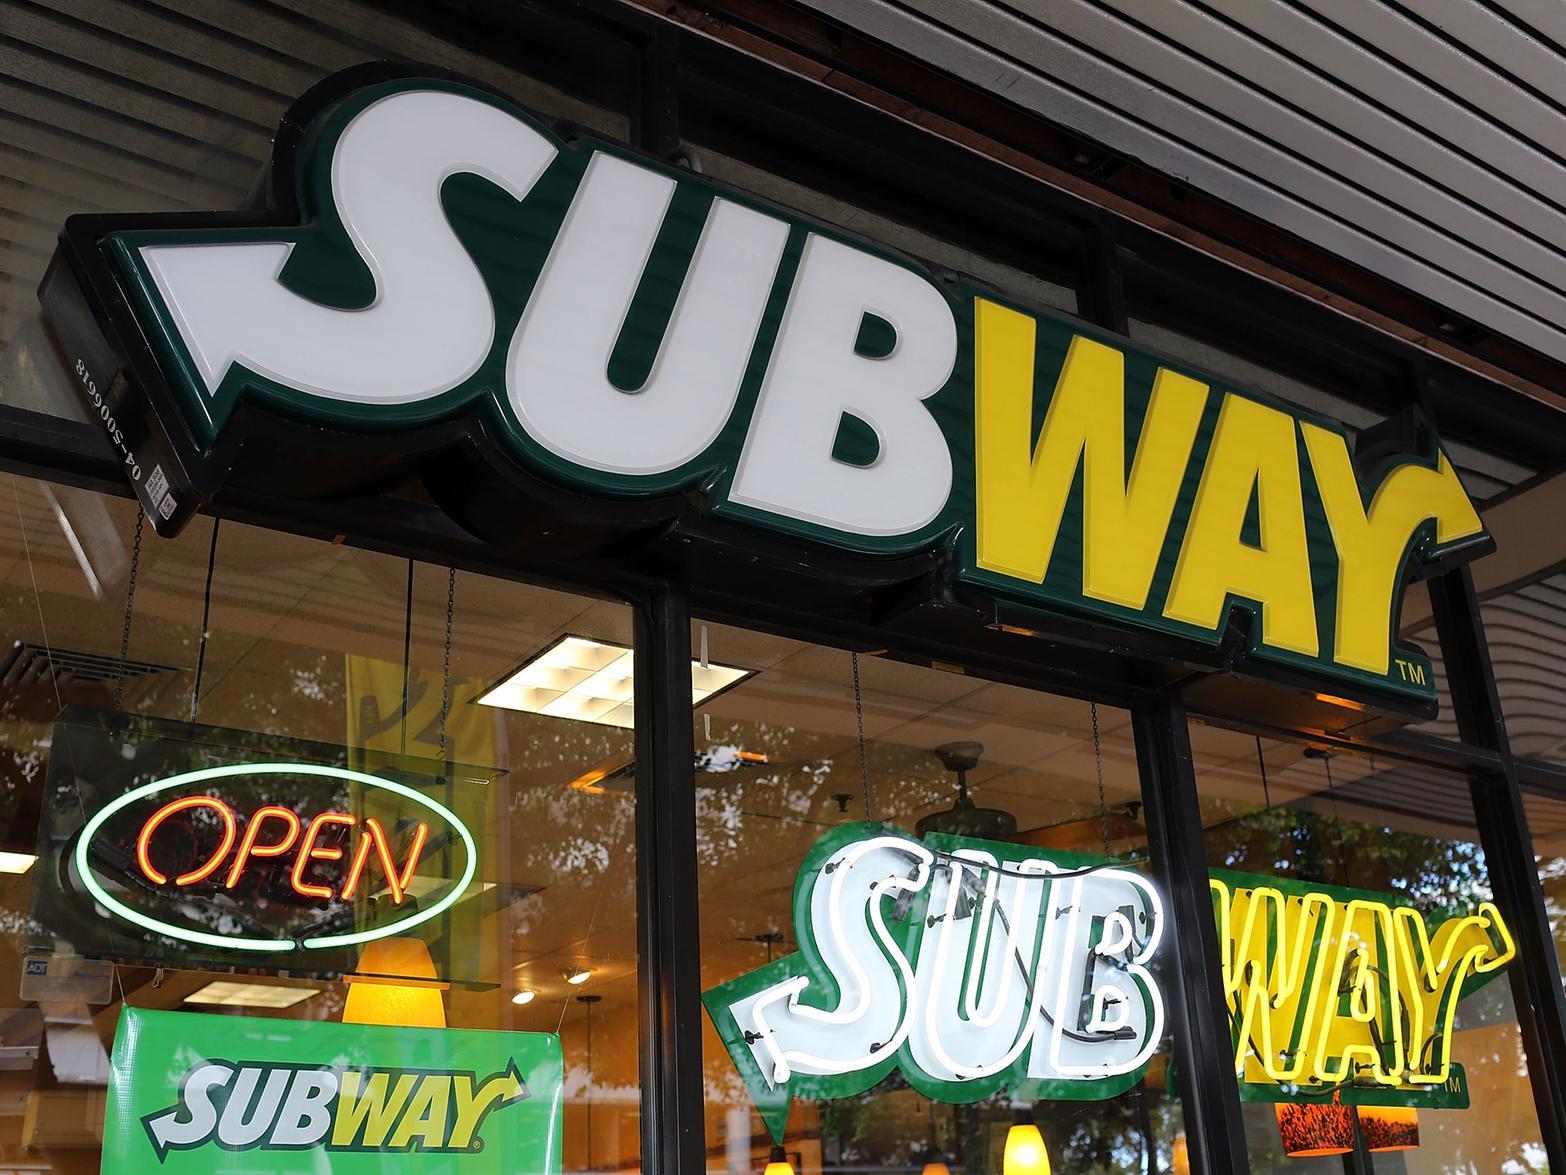 Fancy yourself a footlong sandwich? Apparently, lots of you do. Subway are famed for their quick and customisable sandwiches and meal deals.